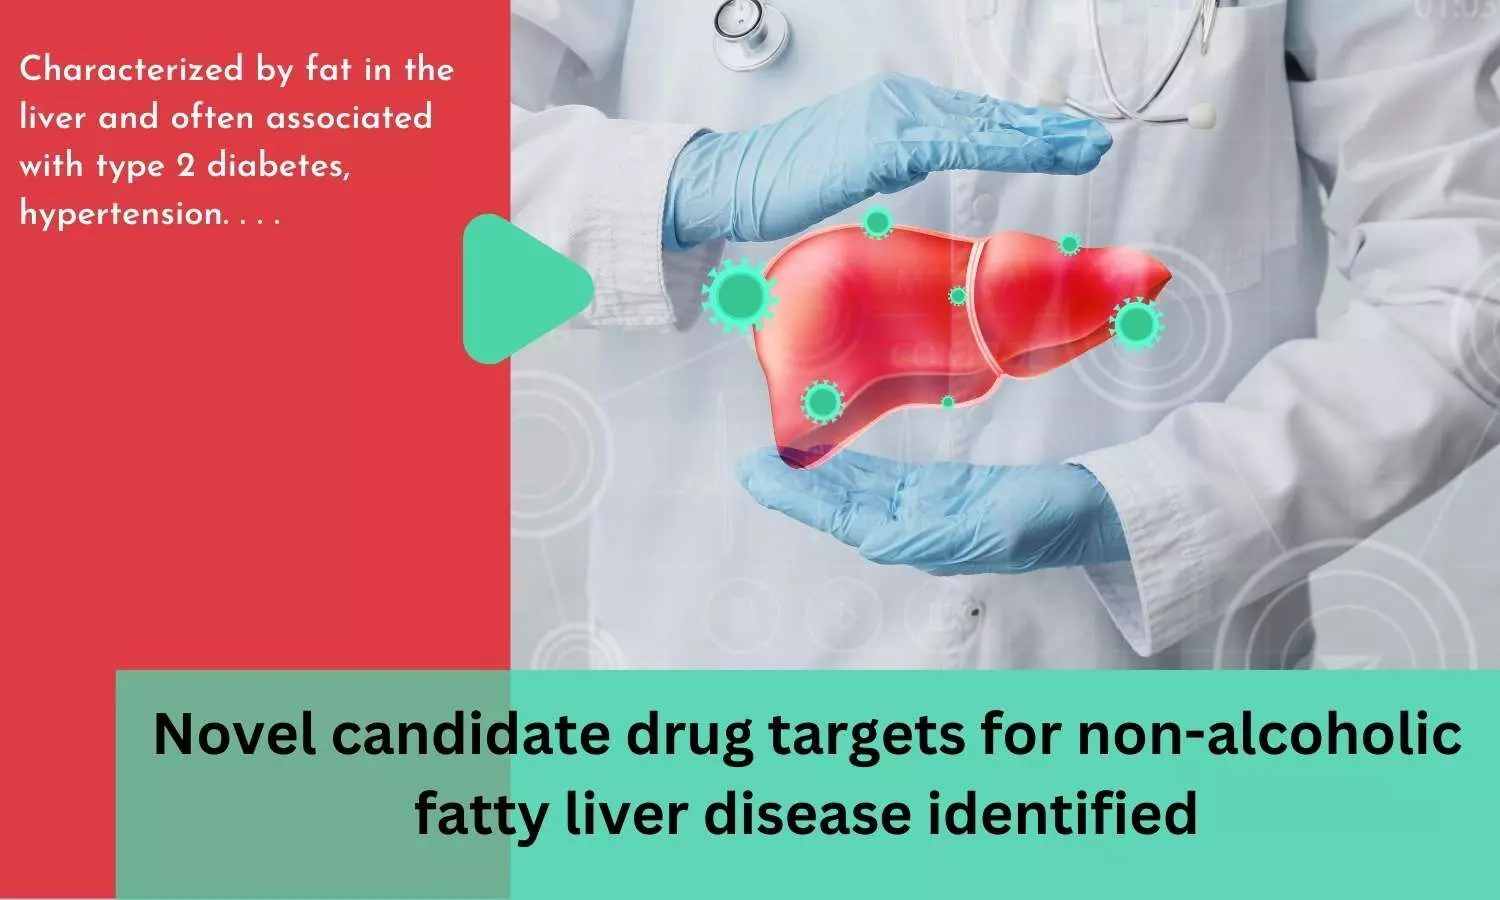 Novel candidate drug targets for non-alcoholic fatty liver disease identified